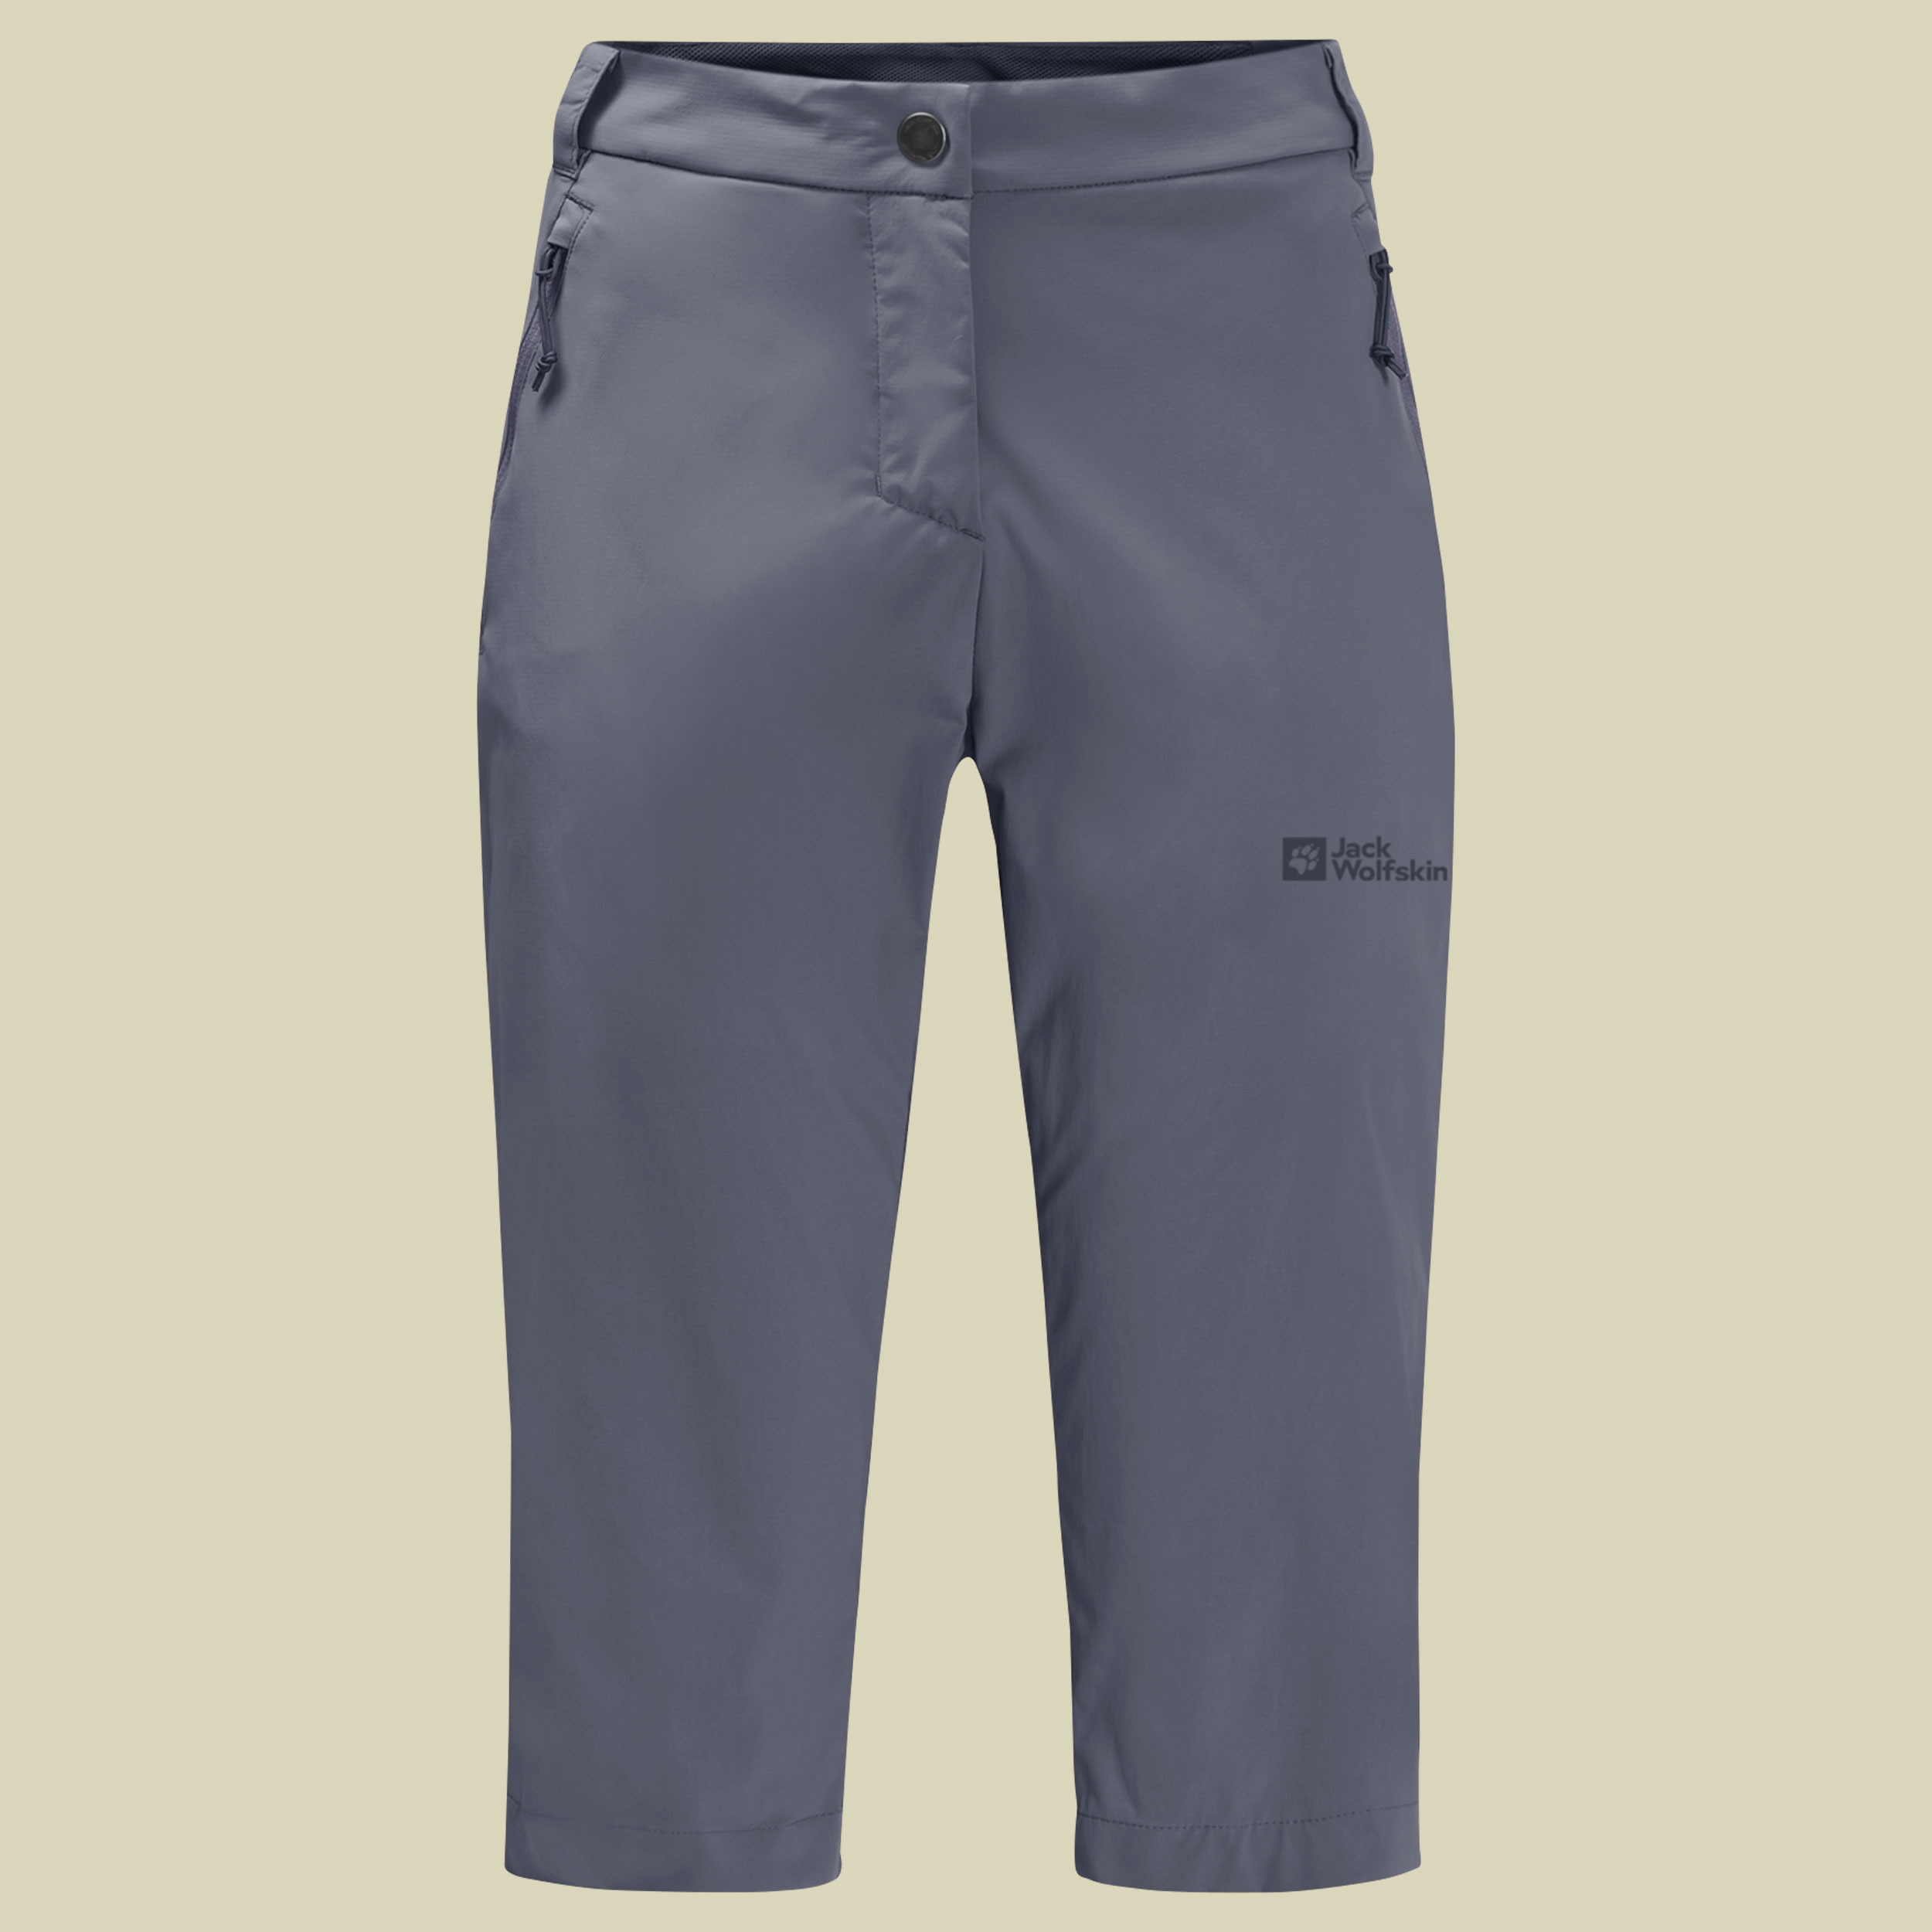 Activate Light ¾ Pants Women Größe 44 Farbe dolphin